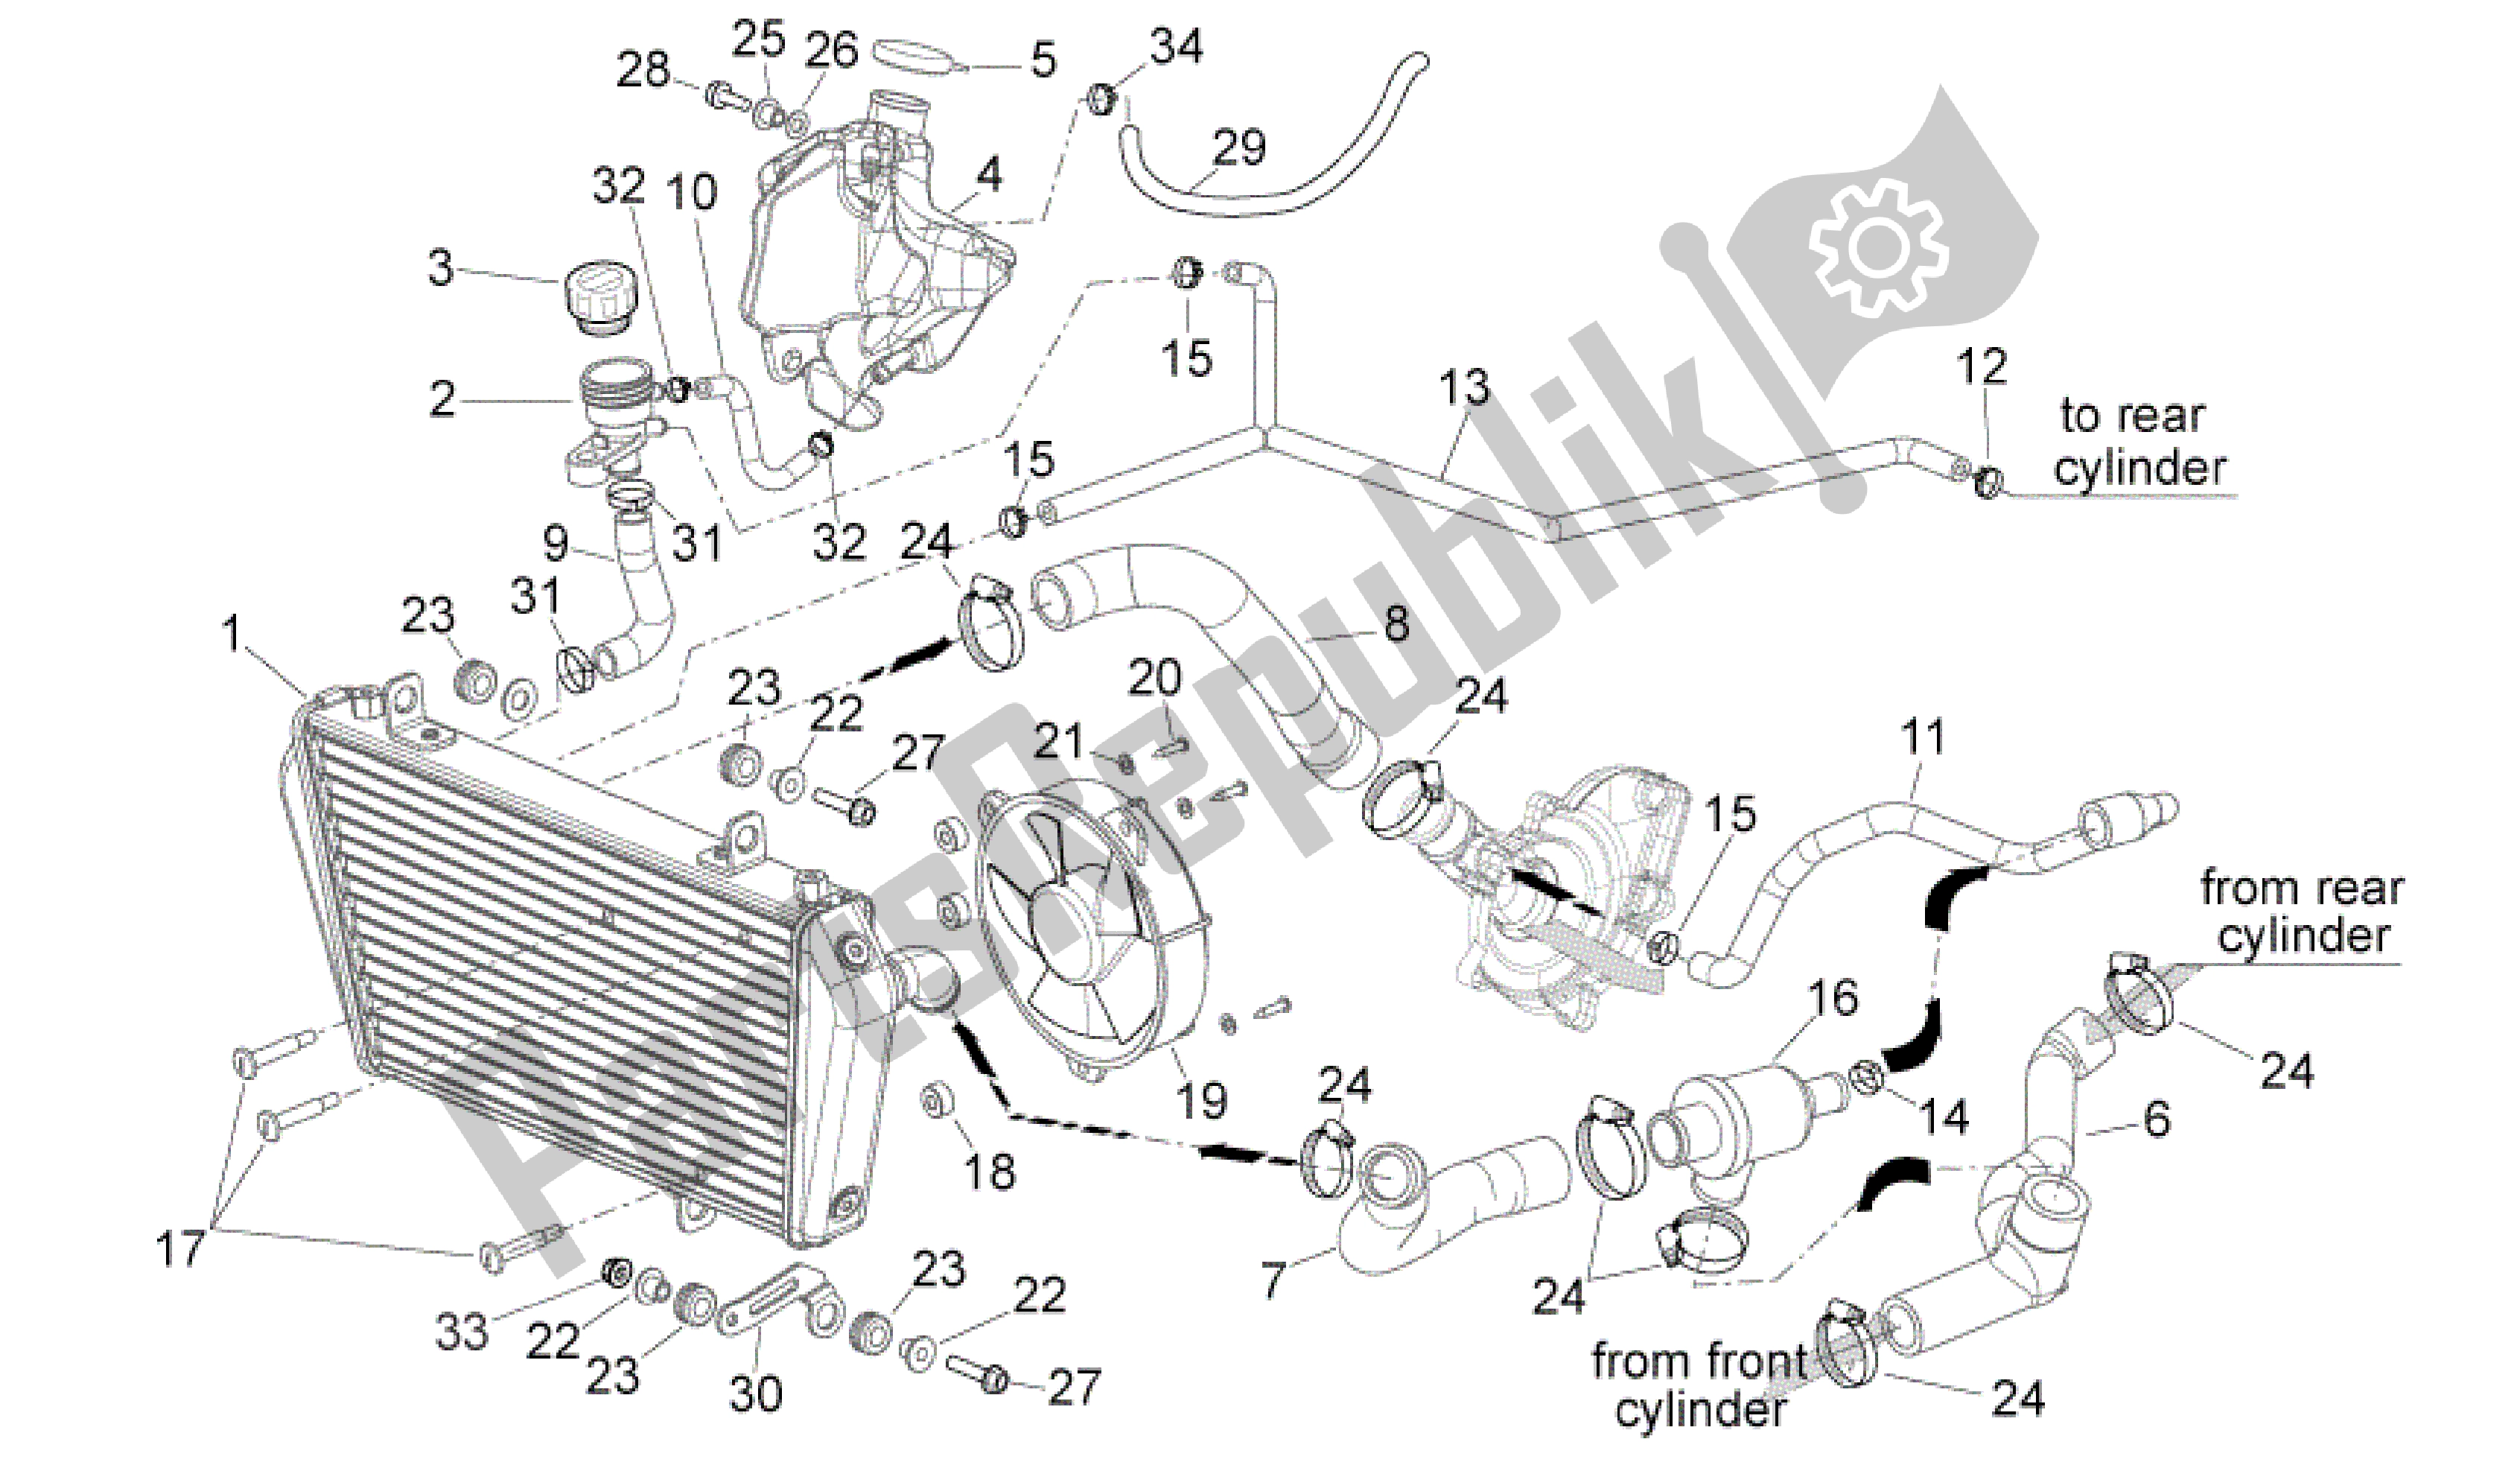 All parts for the Cooling System of the Aprilia Shiver 750 2010 - 2013